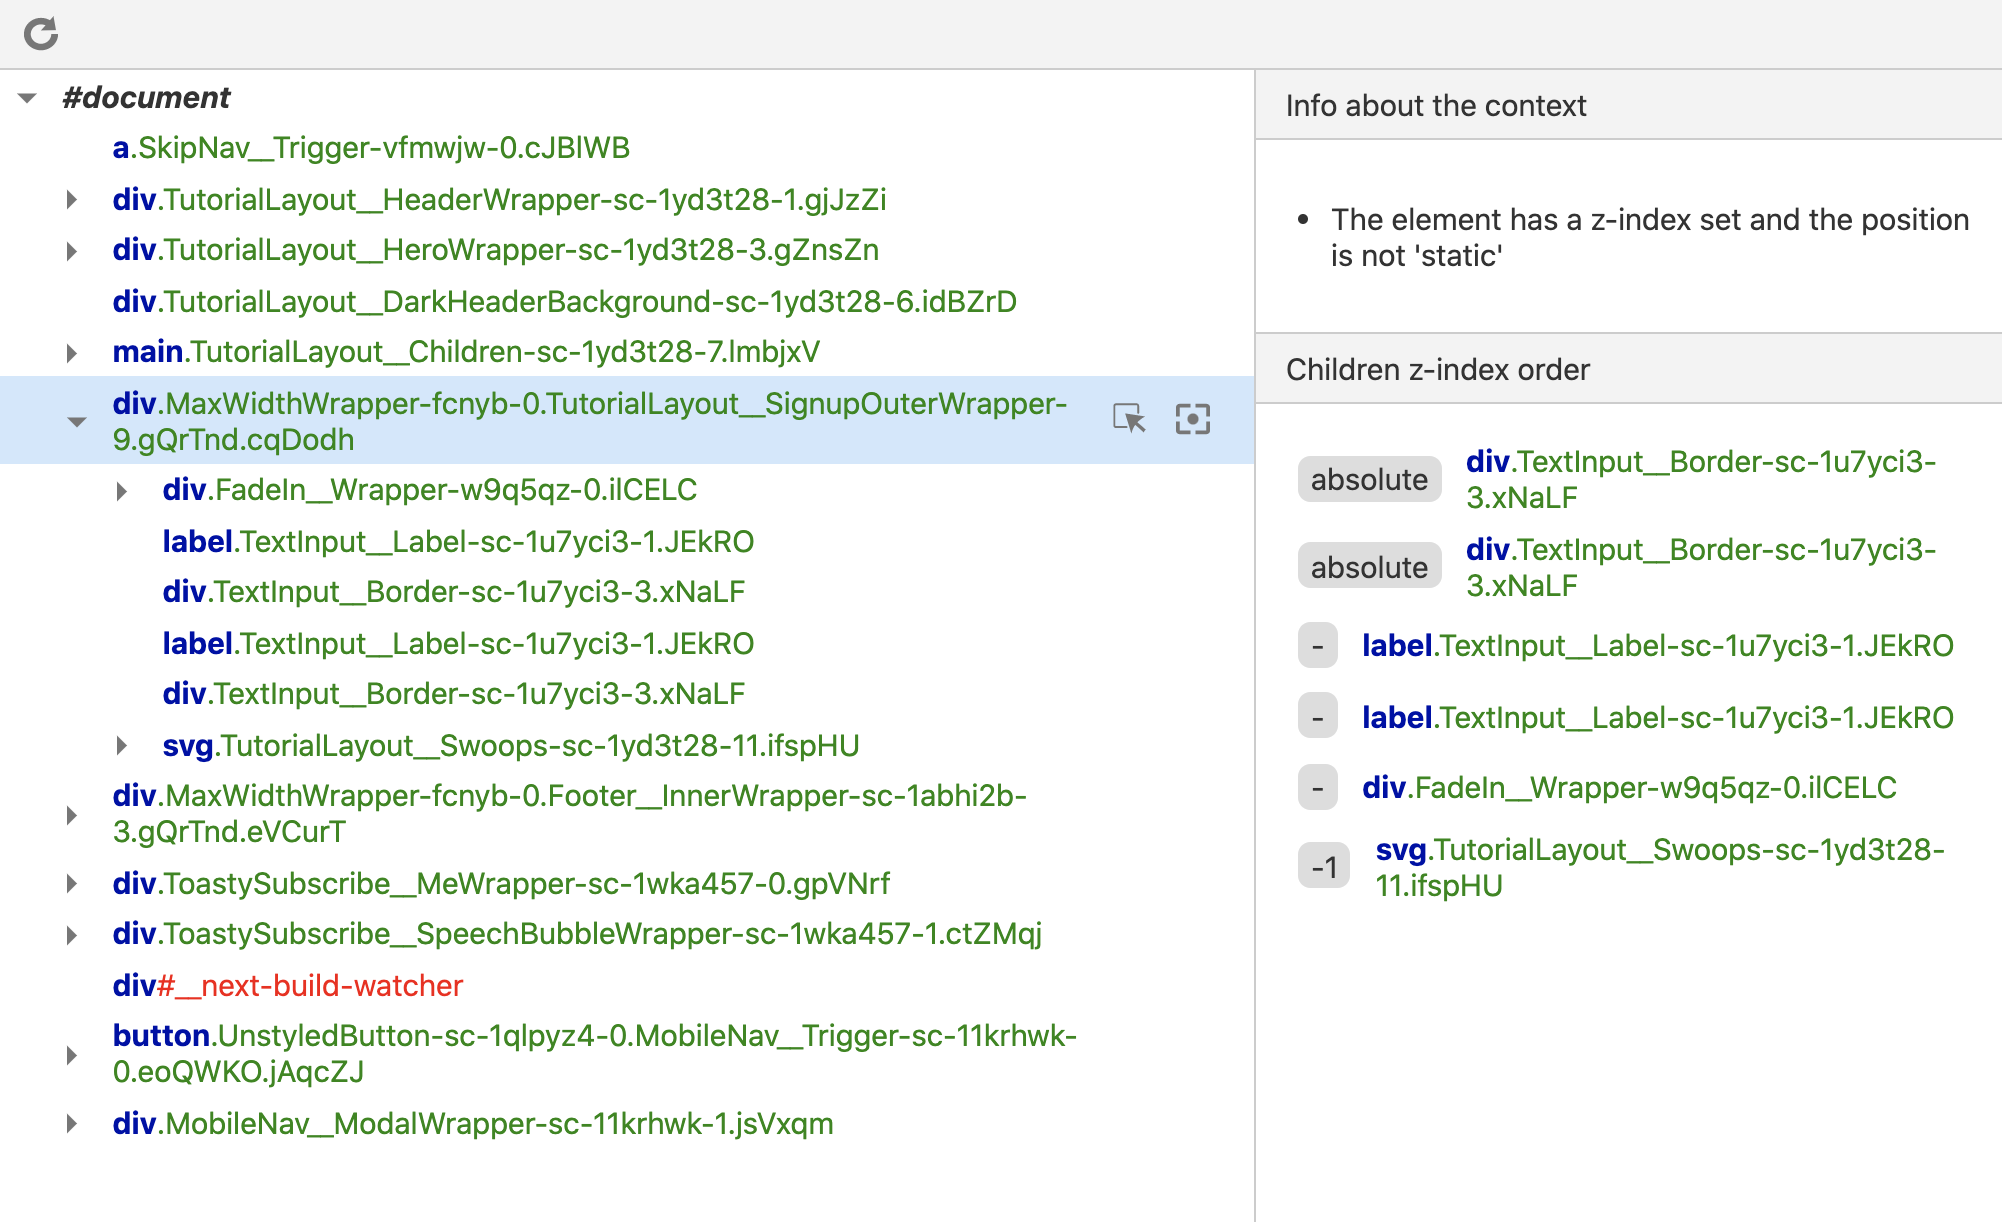 Screenshot of the Chrome devtools with a new pane that shows info about the element's current stacking context